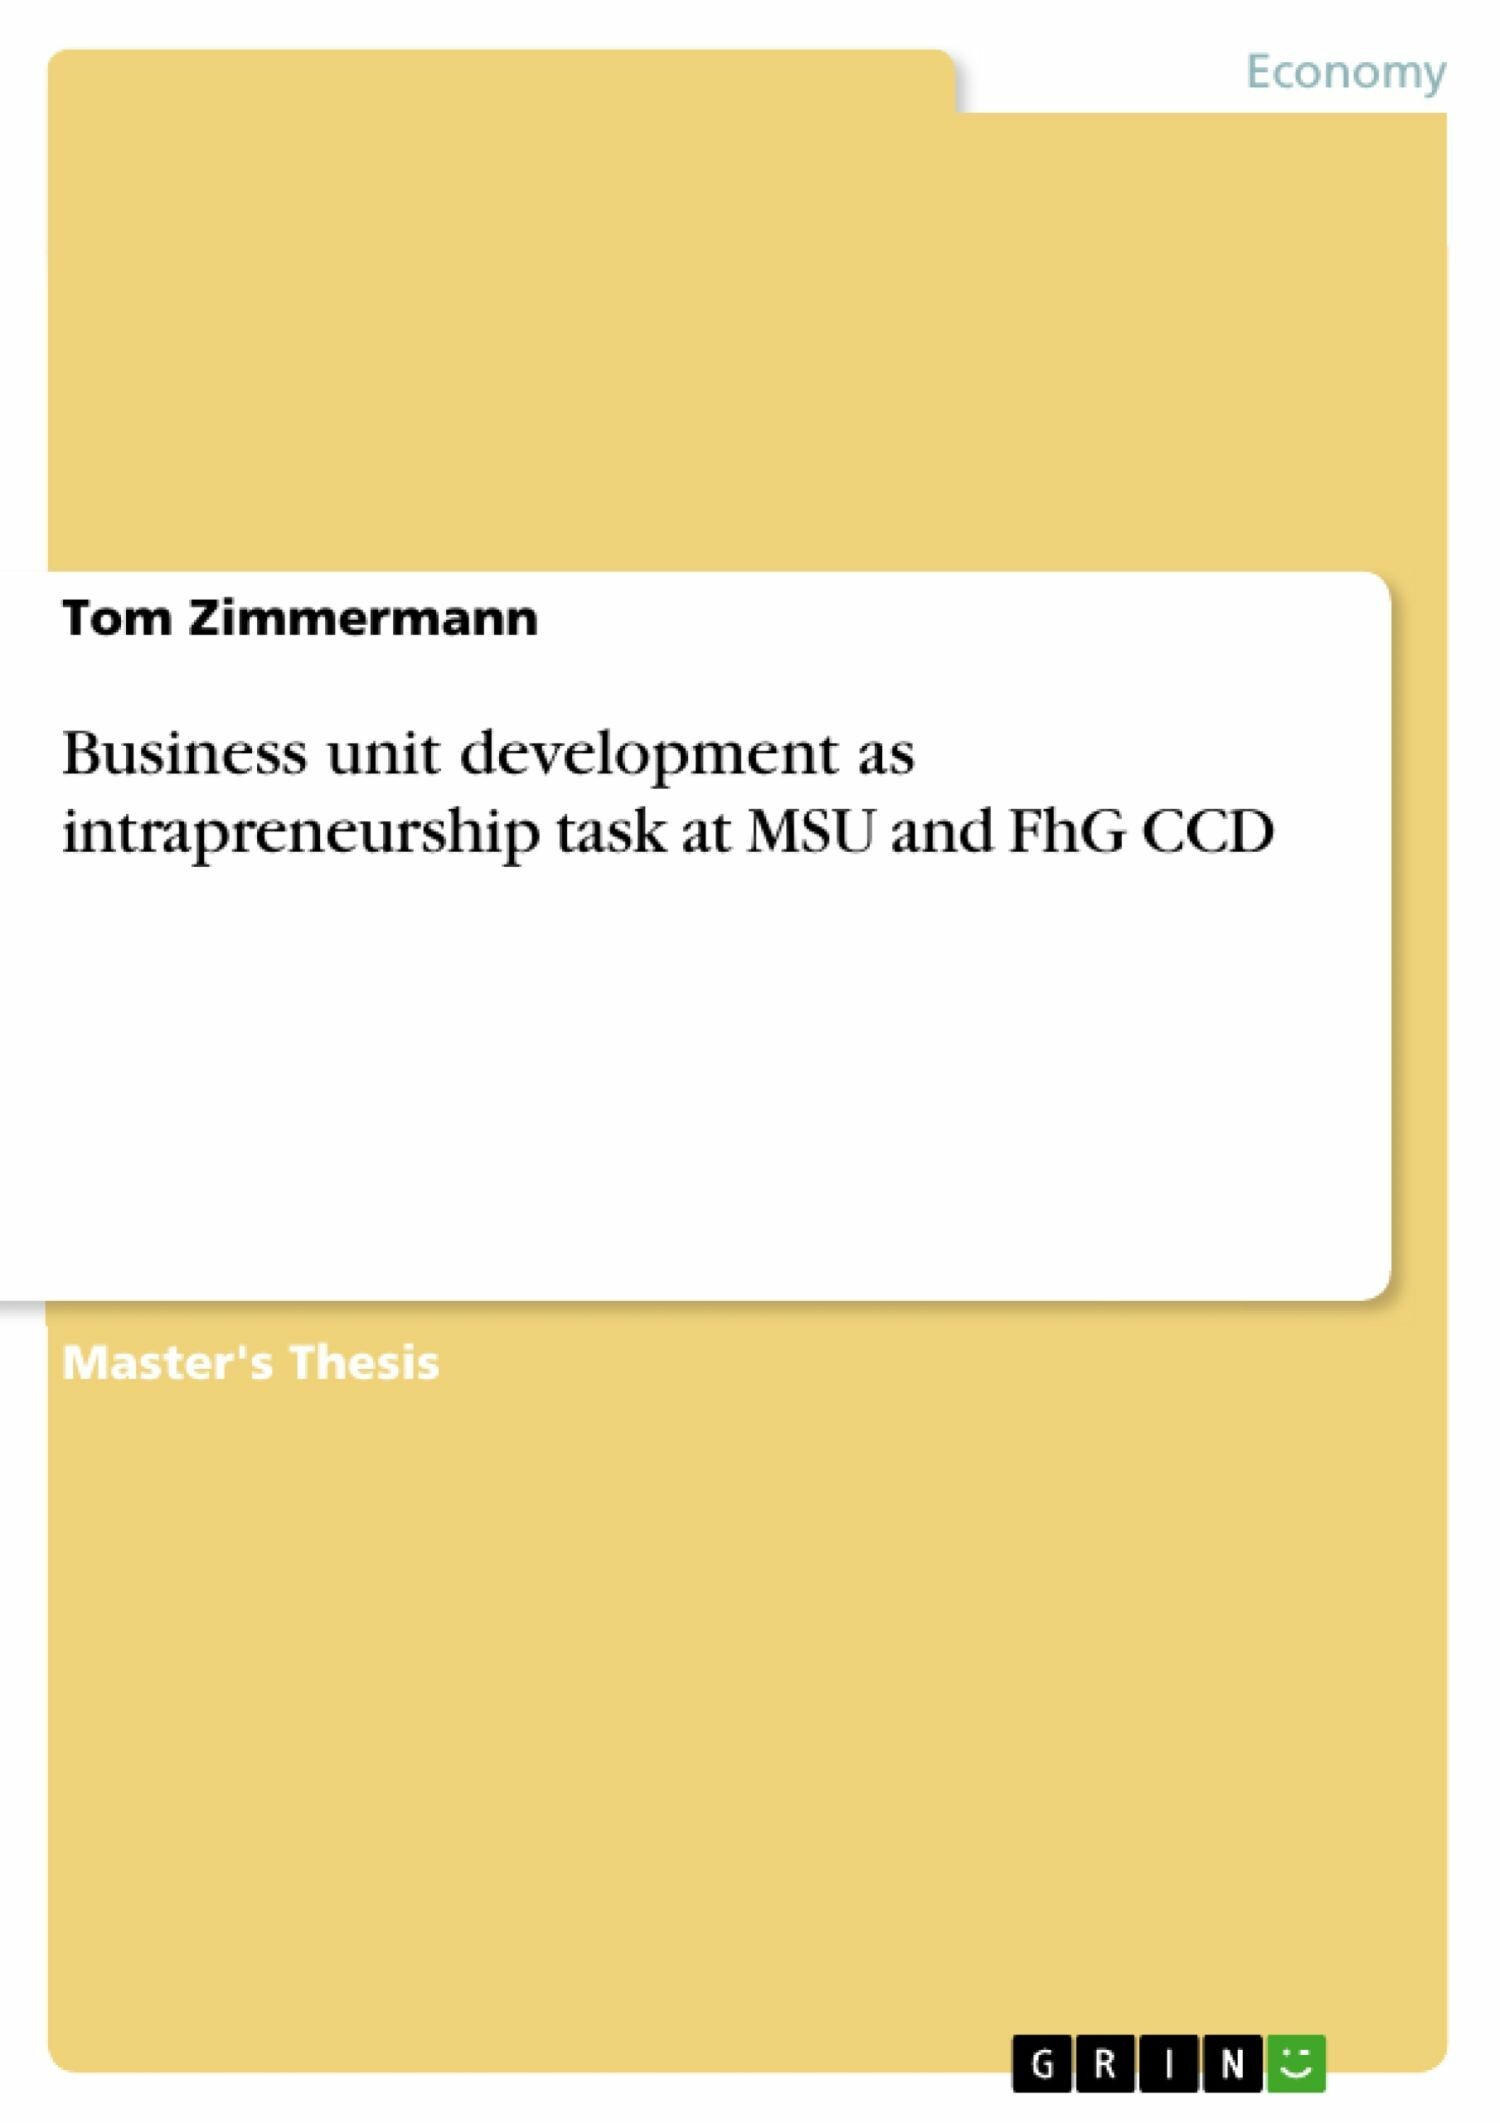 Business unit development as intrapreneurship task at MSU and FhG CCD